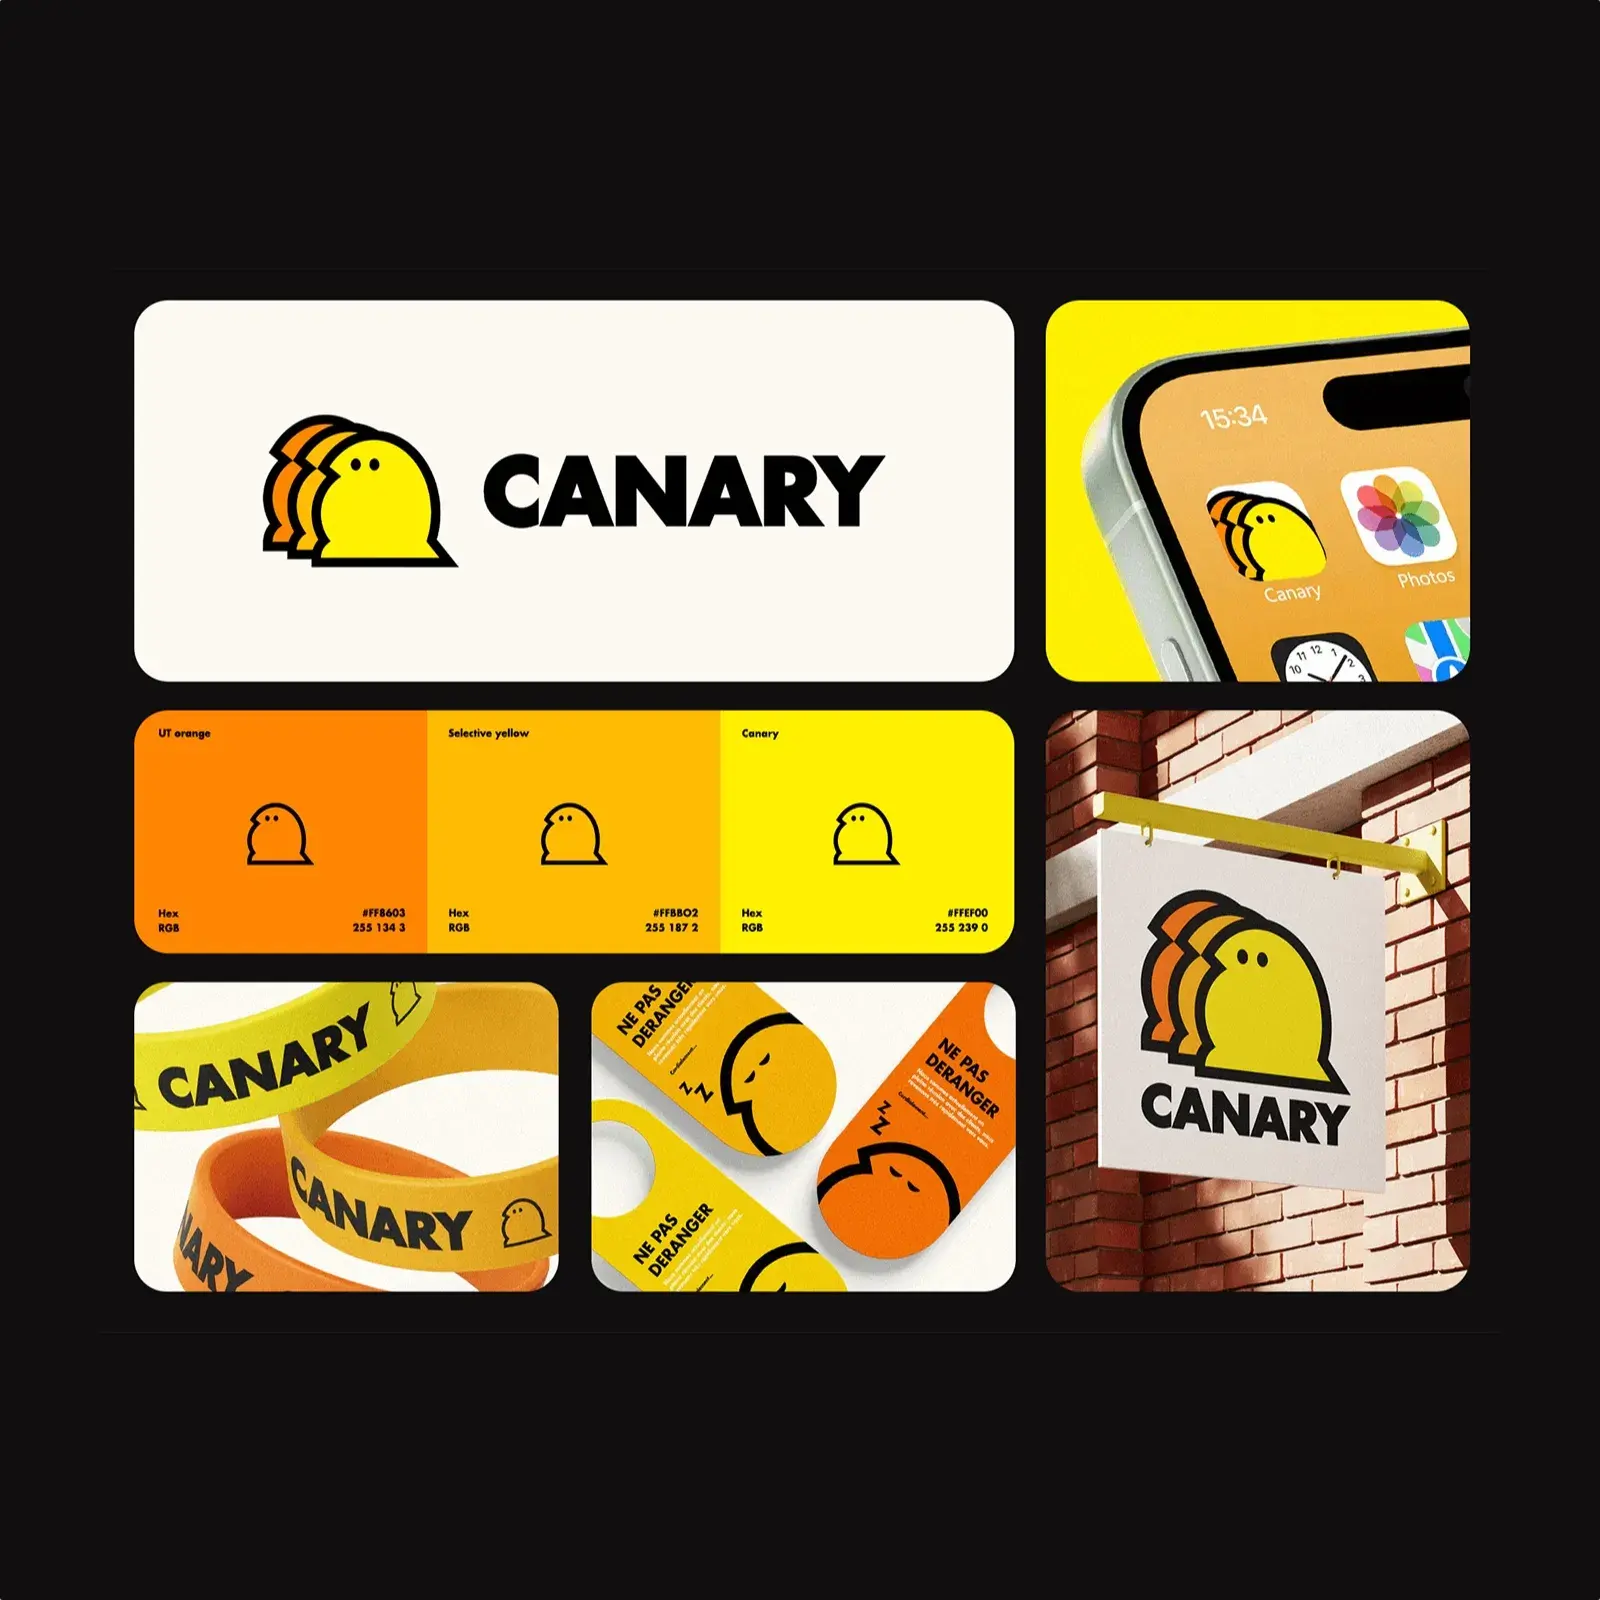 Building a Memorable E-Commerce Brand: The Canary Identity